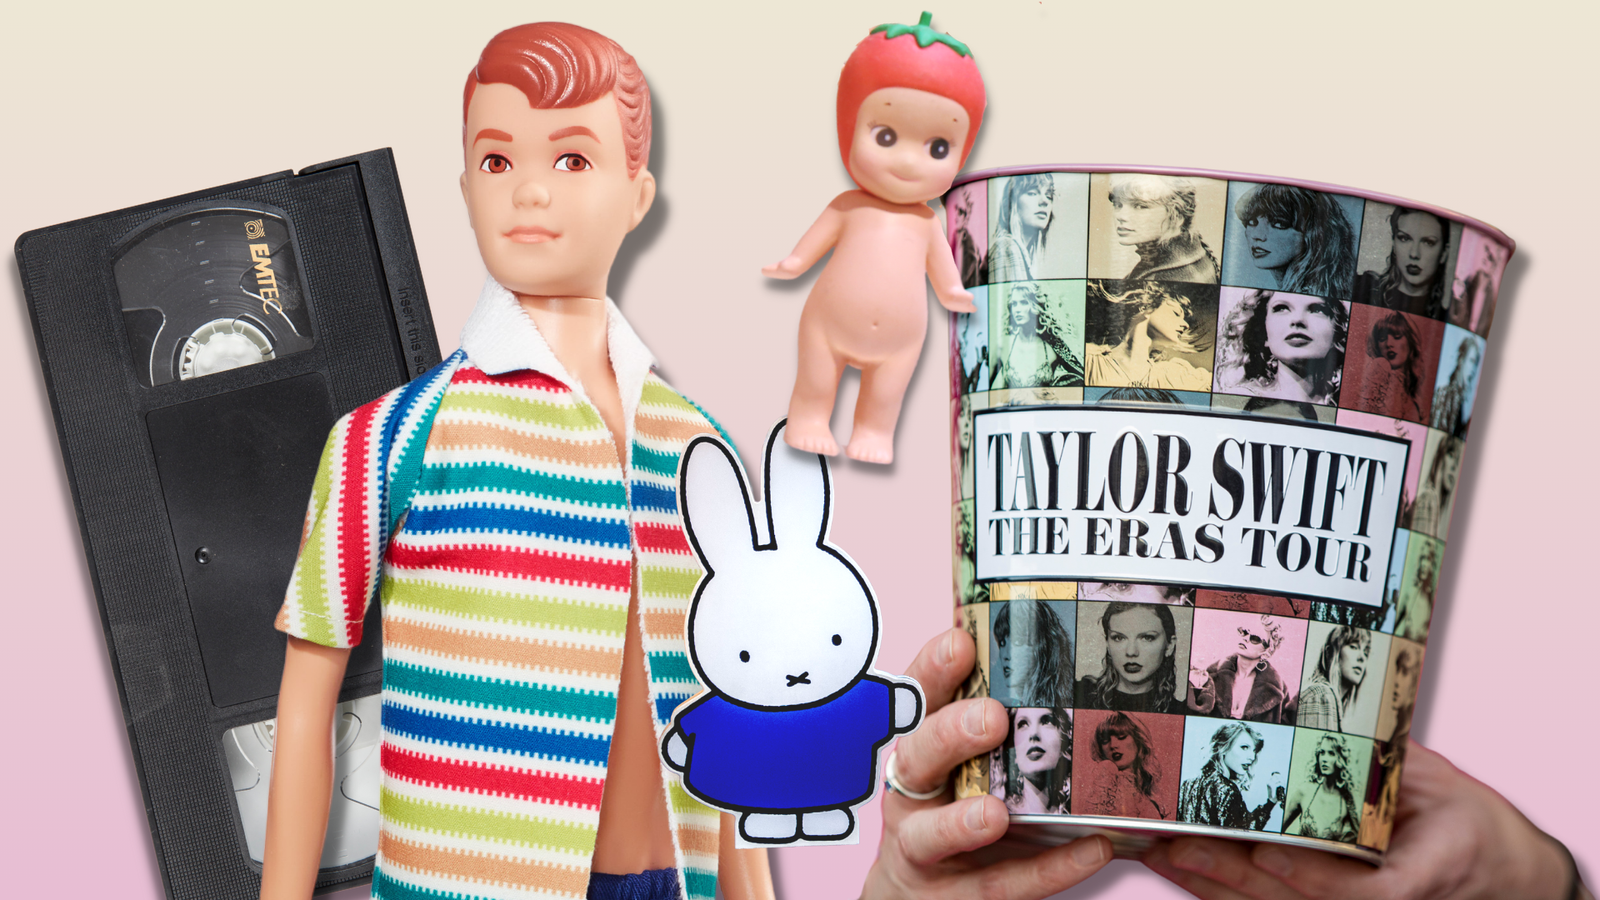 Taylor Swift, Alix Earle, and 4 more icons people searched for on eBay in 2023